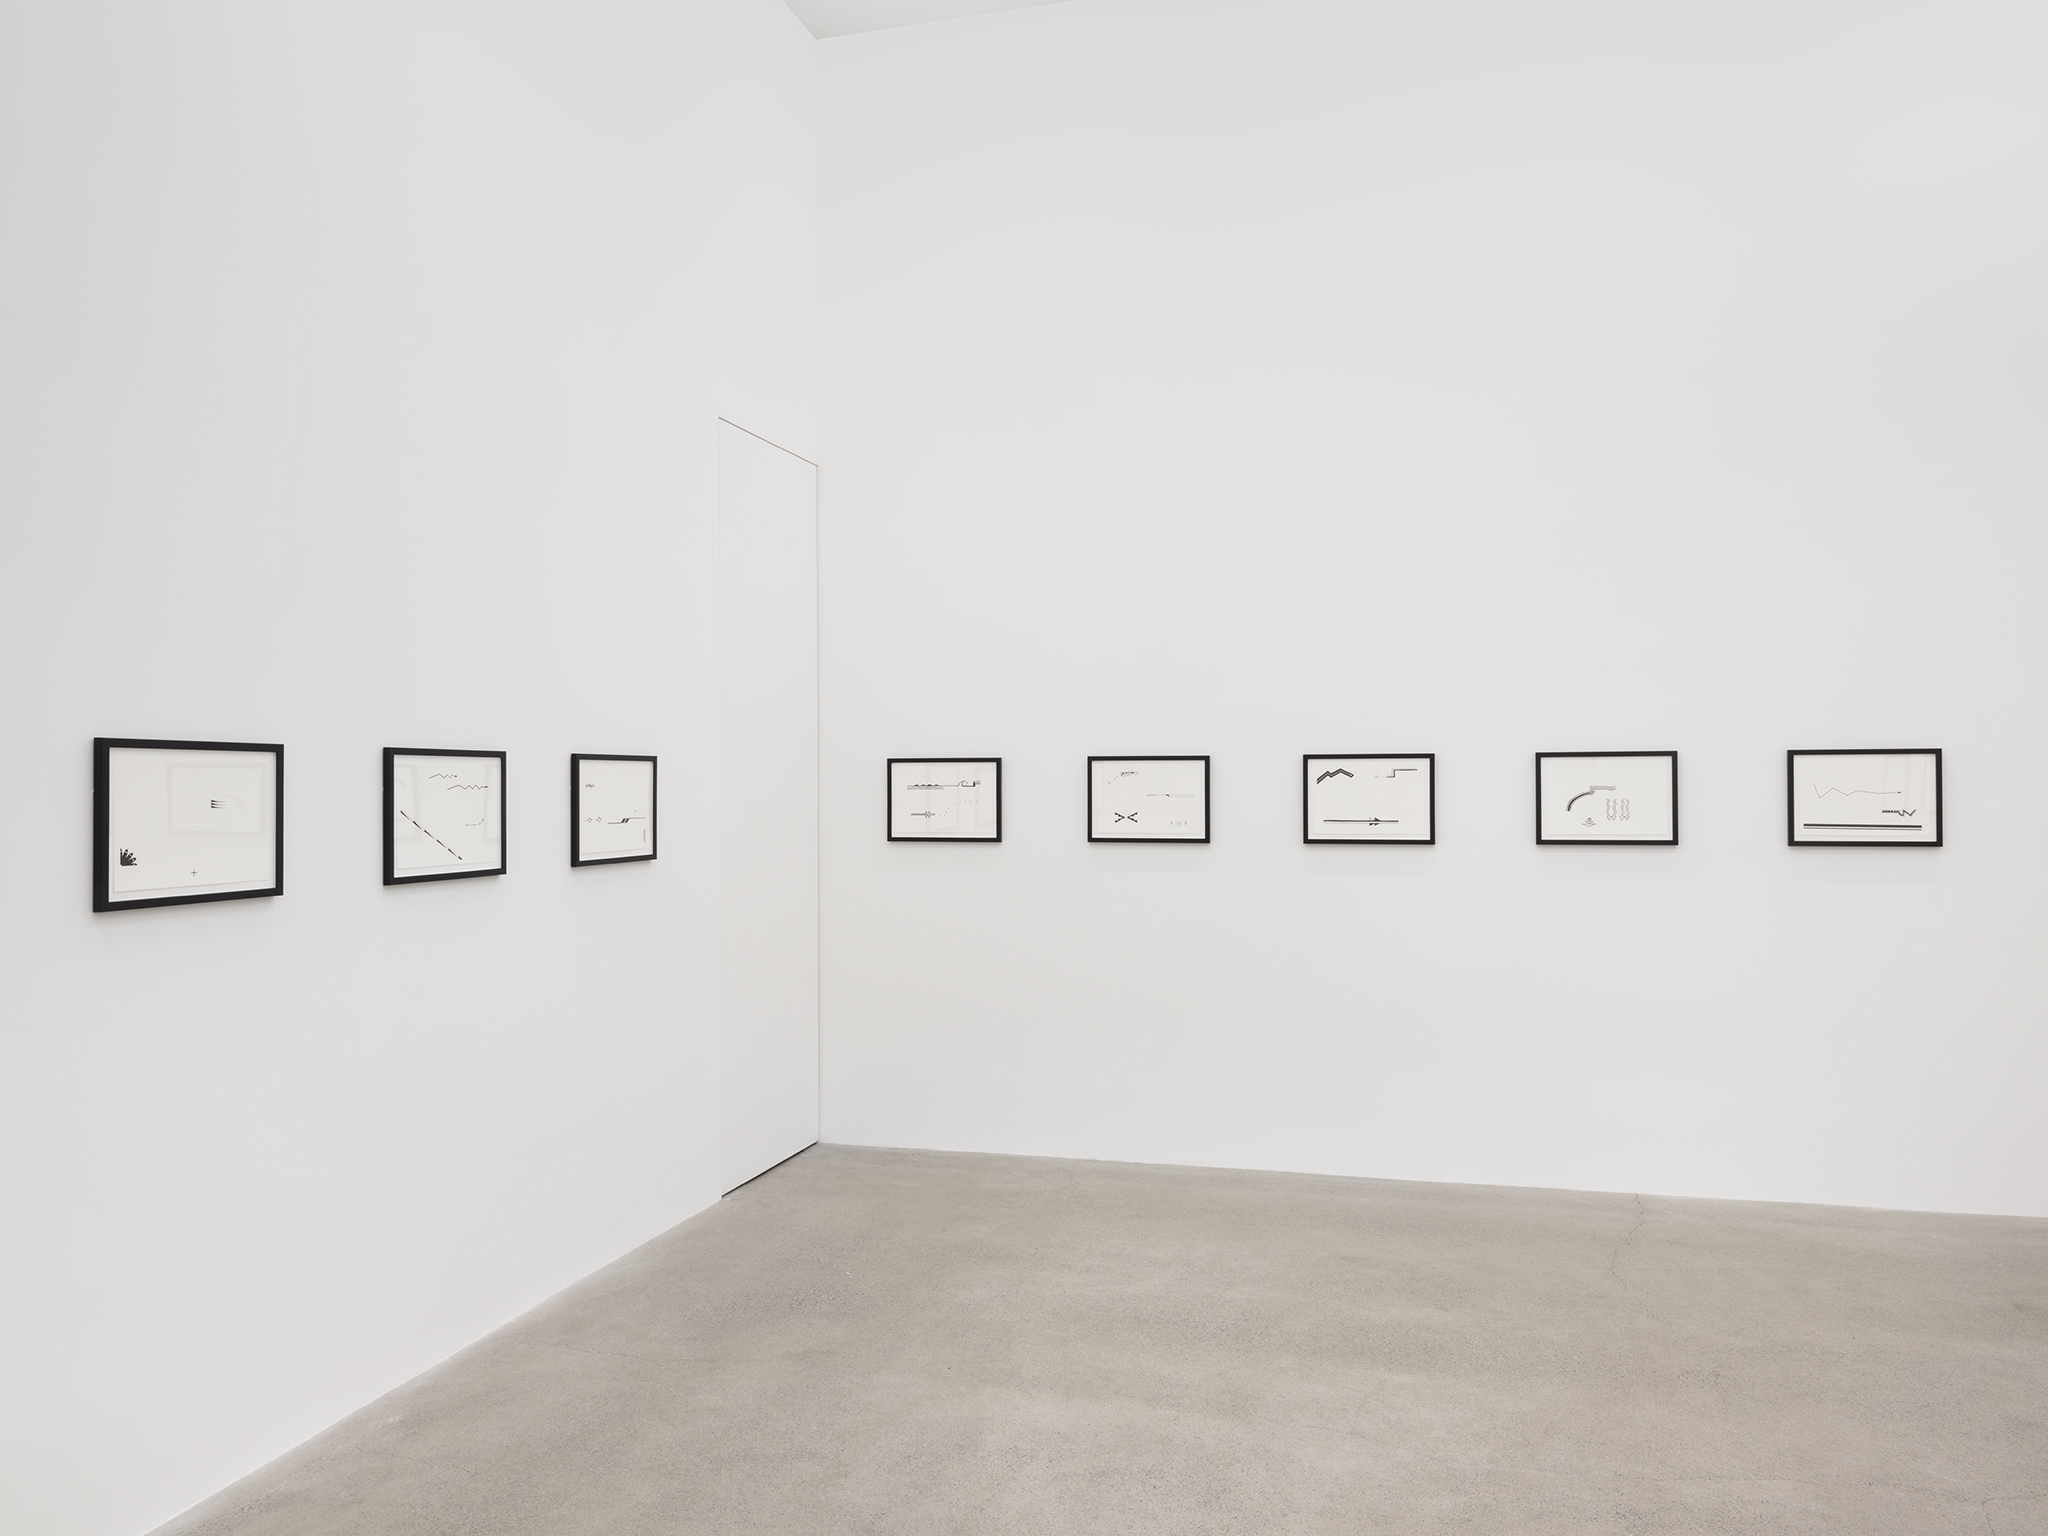 Raven Chacon, …lahgo adil’i dine doo yeehosinilgii yidaaghi, 2004, 16 inkjet prints, each 14 x 20 in. (36 x 51 cm). Installation view, Unexplained Parade, Catriona Jeffries, Vancouver, March 9, 2019​ by 